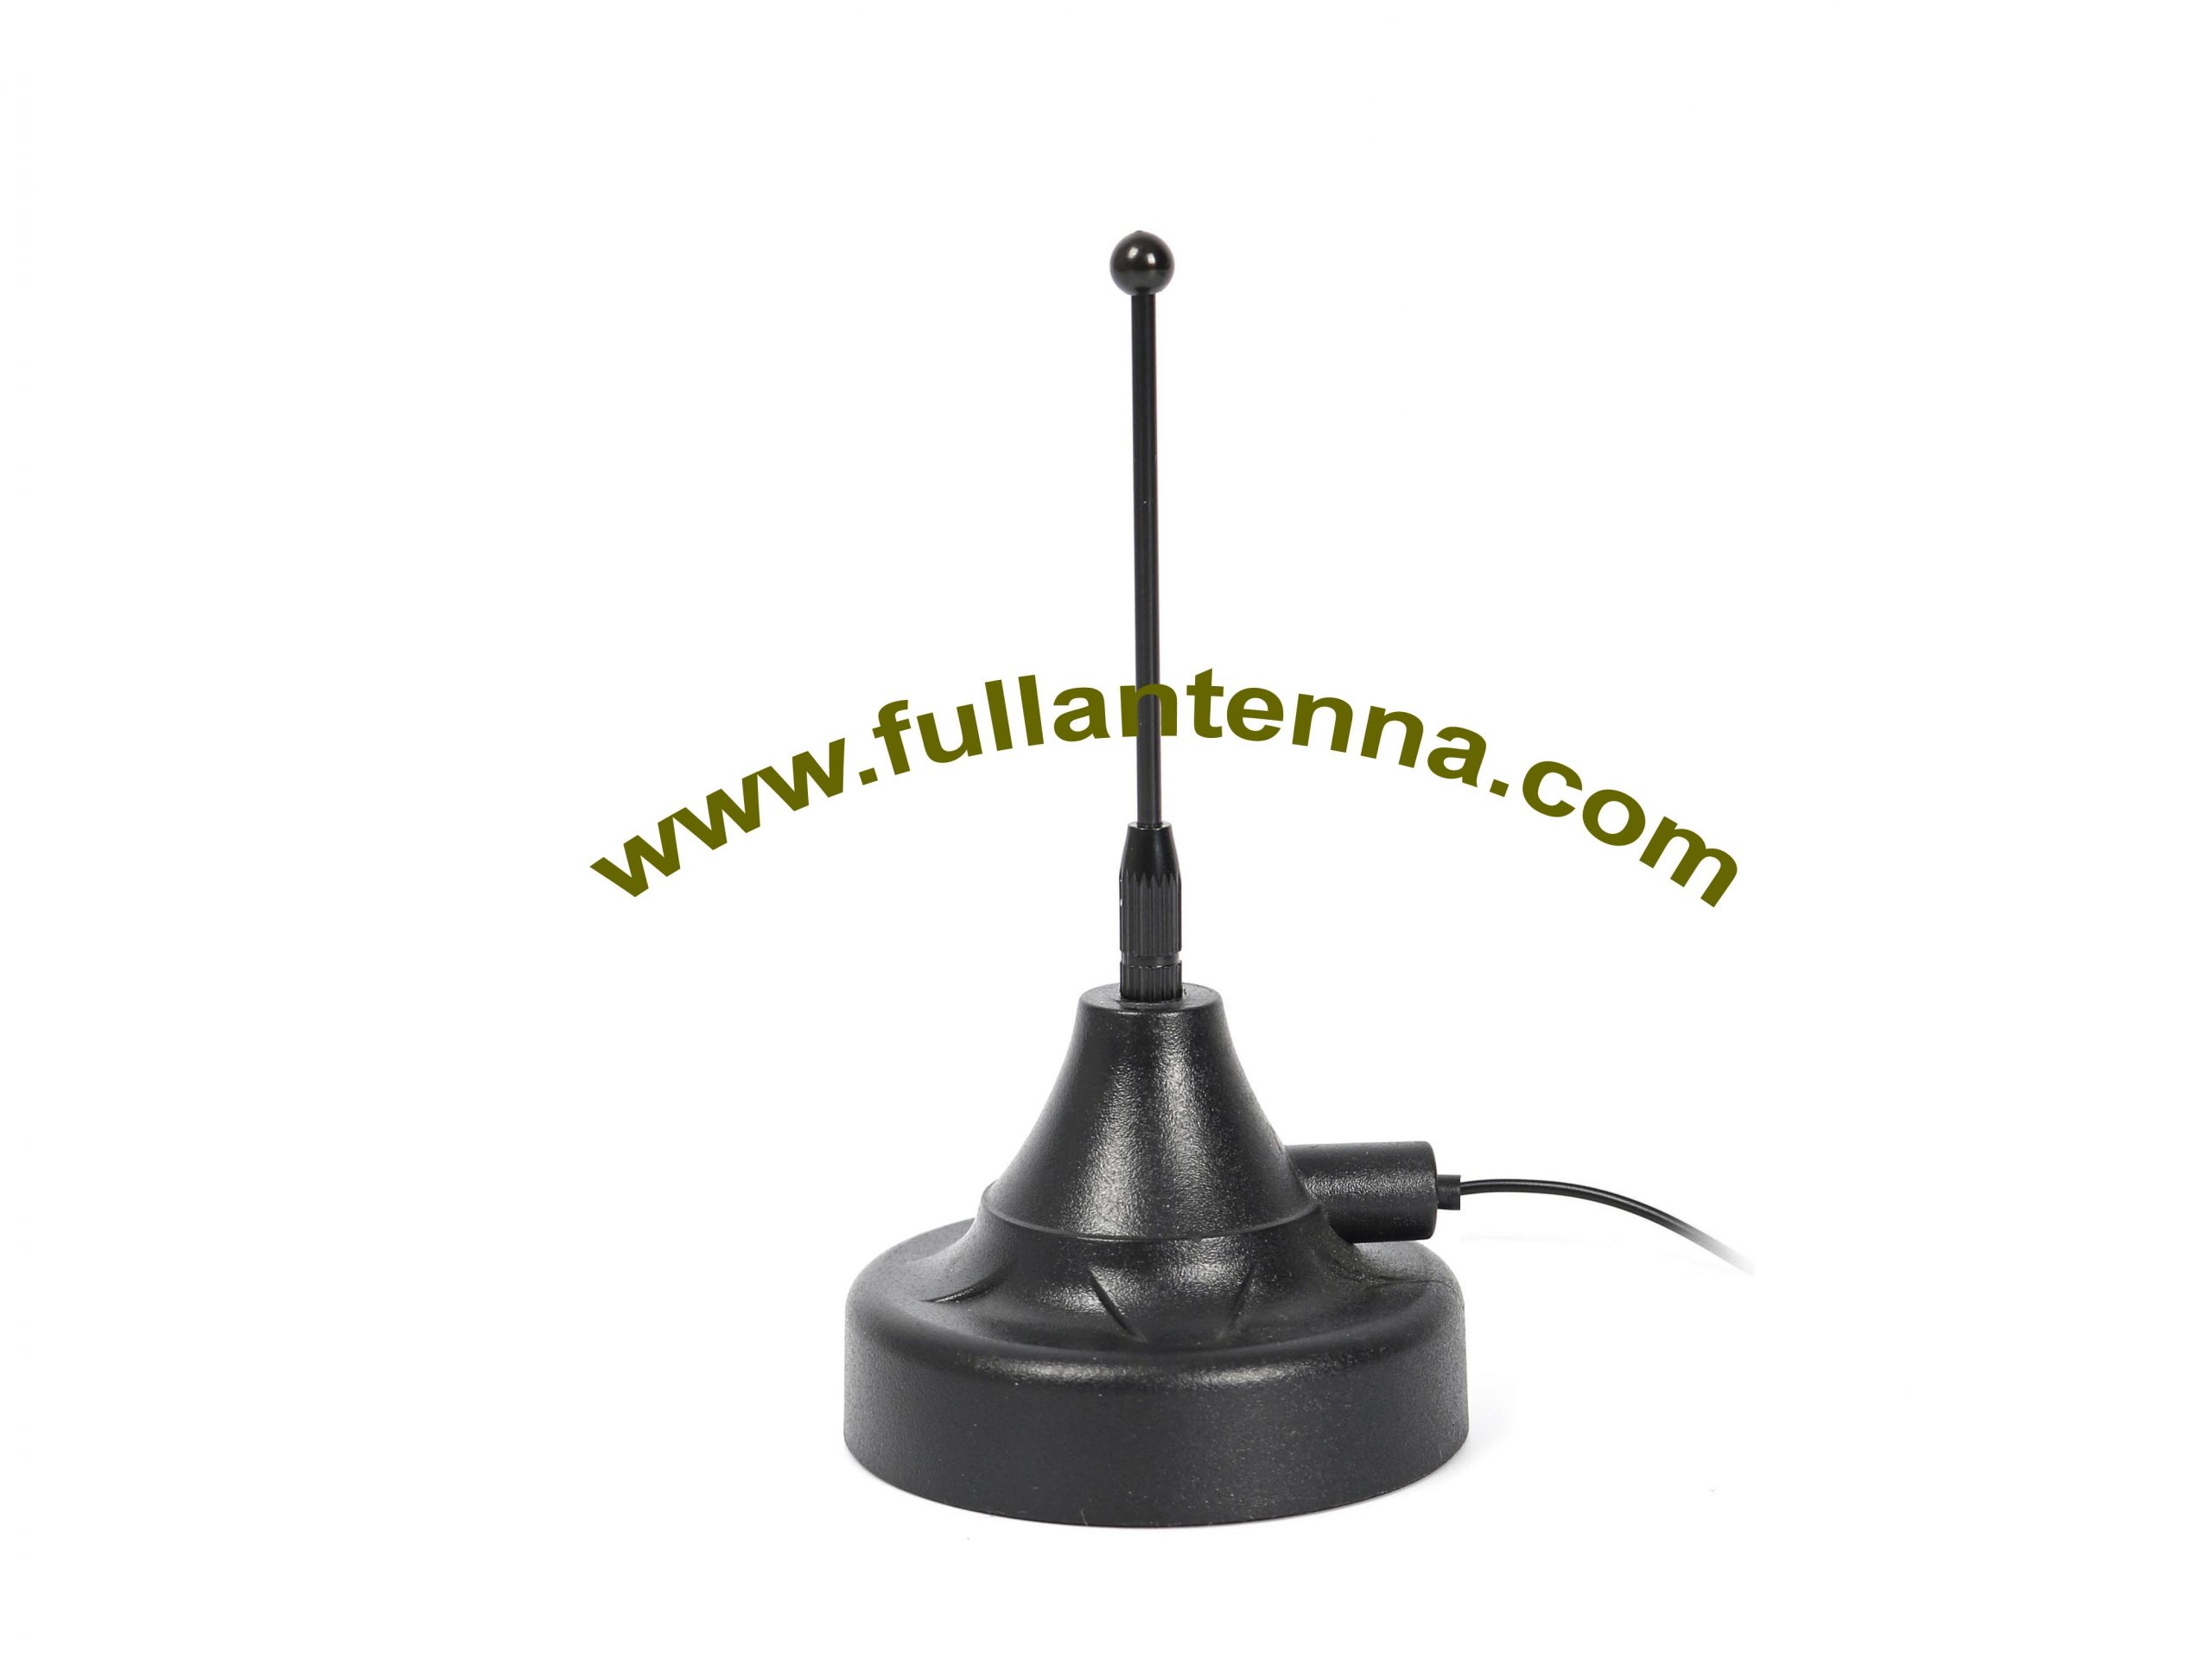 P/N:FAGSM.0606，GSM External Antenna,900-1800mhz frequency magnetic mount FME female